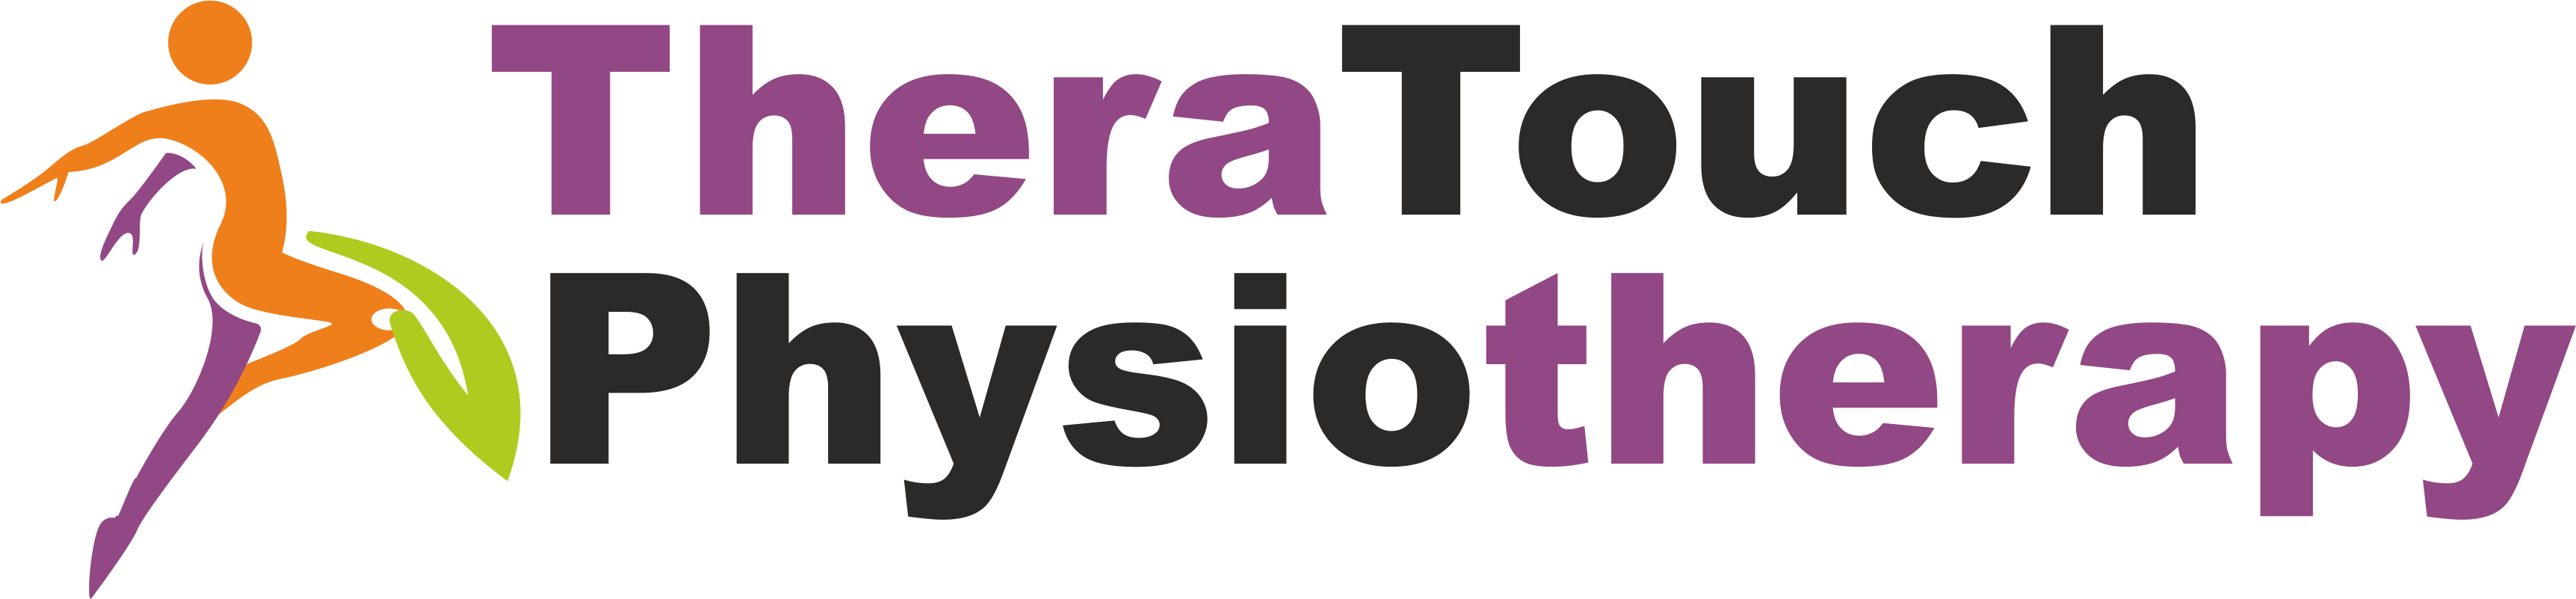 TheraTouch Physiotherapy Logo